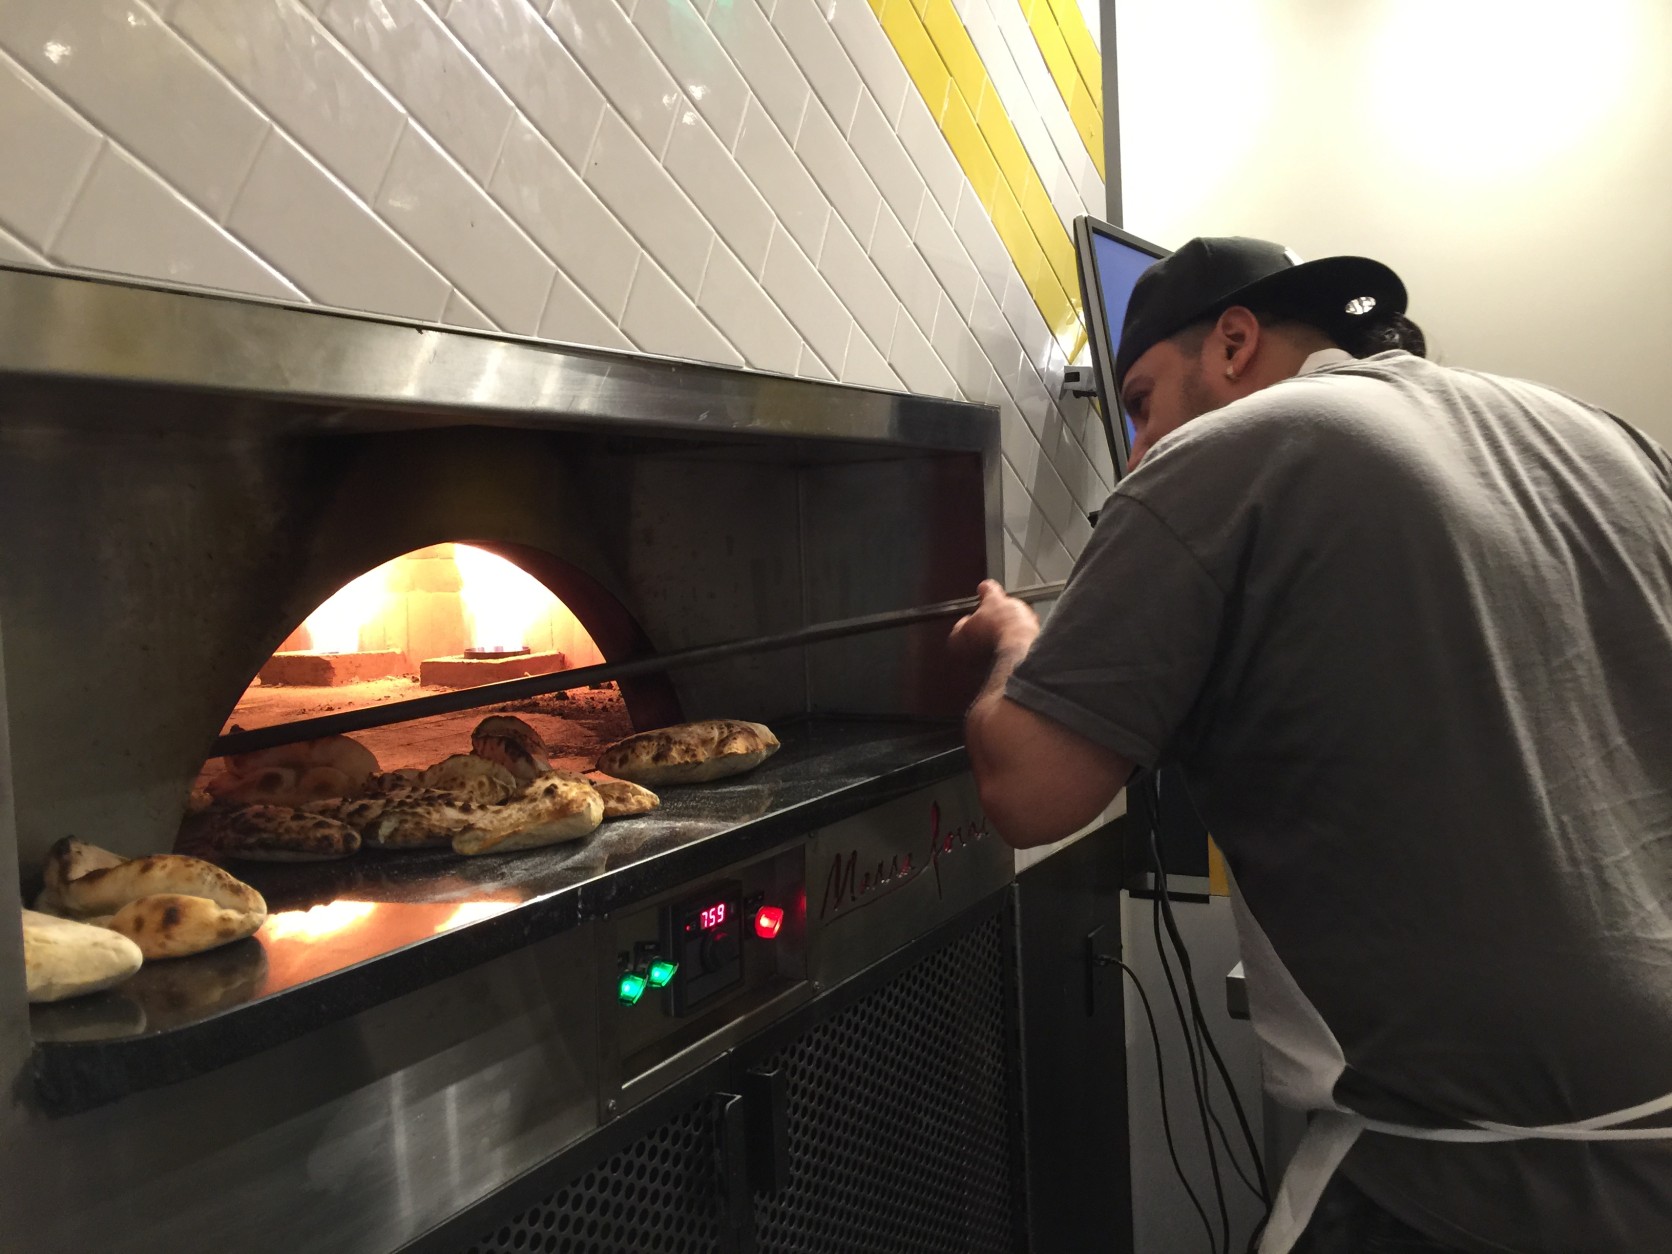 Daniel Salamanca gets to work at the oven at Veloce. (WTOP/Kristi King)